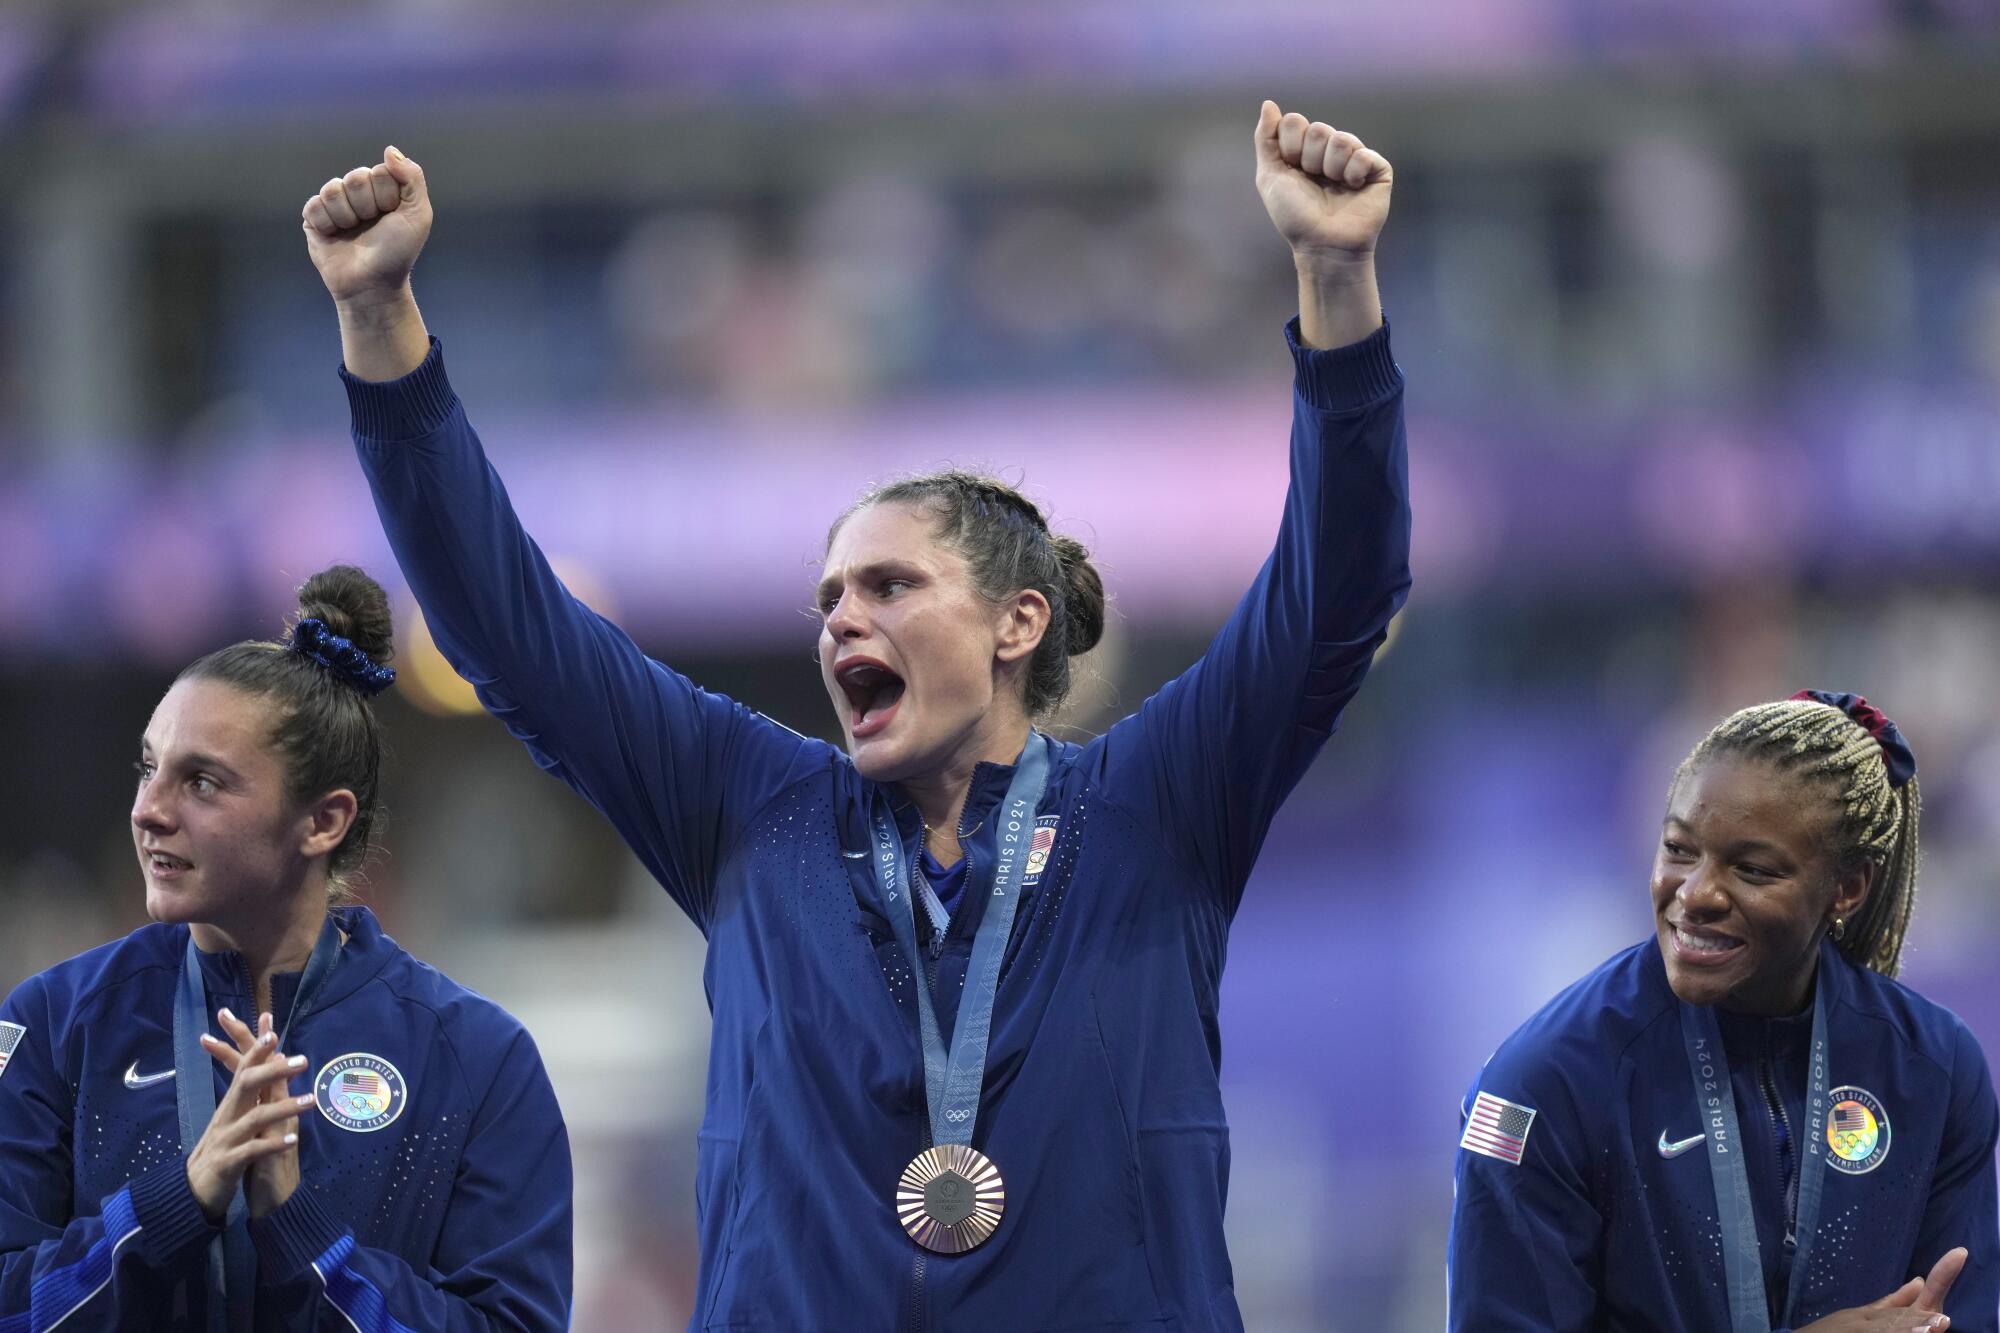 Ilona Maher celebrates on the podium after the U.S. women's rugby sevens team won bronze at the Paris Olympics.